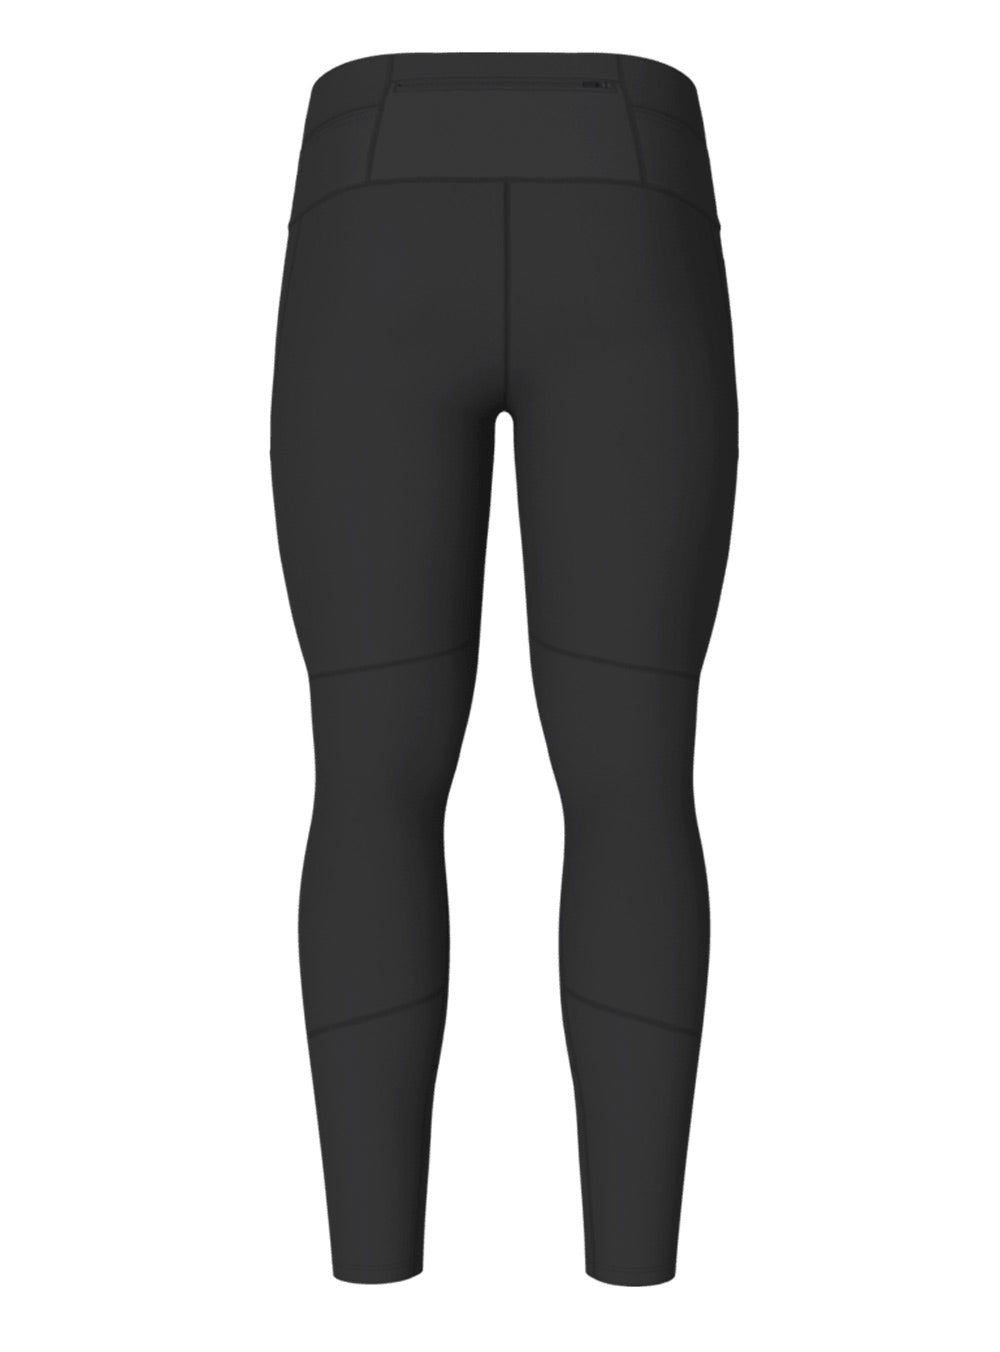 The North Face Men's Winter Warm Pro Tights